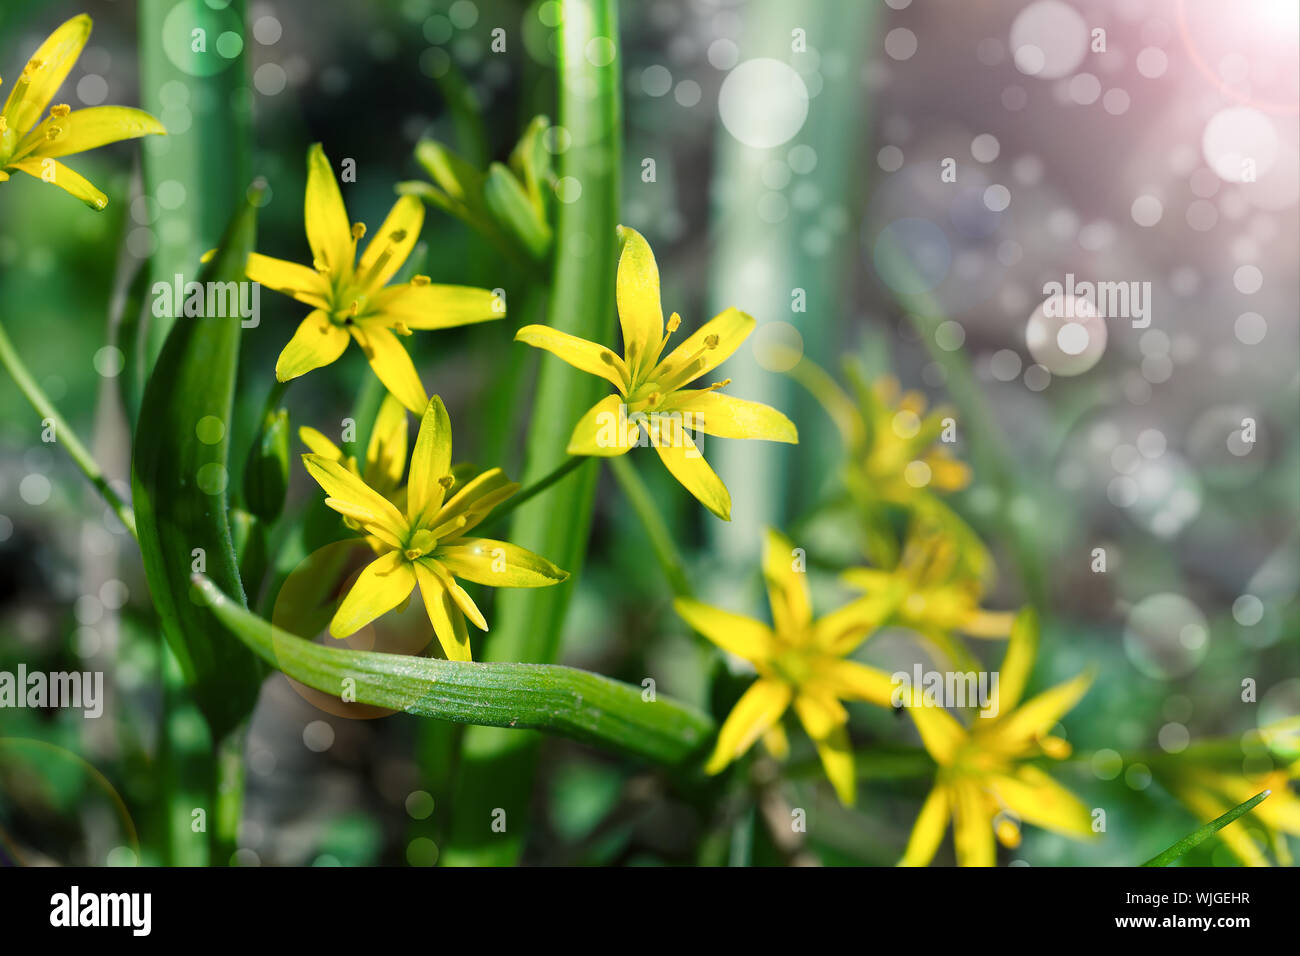 Gagea is spring flowers, grows in damp deciduous woodland. Stock Photo